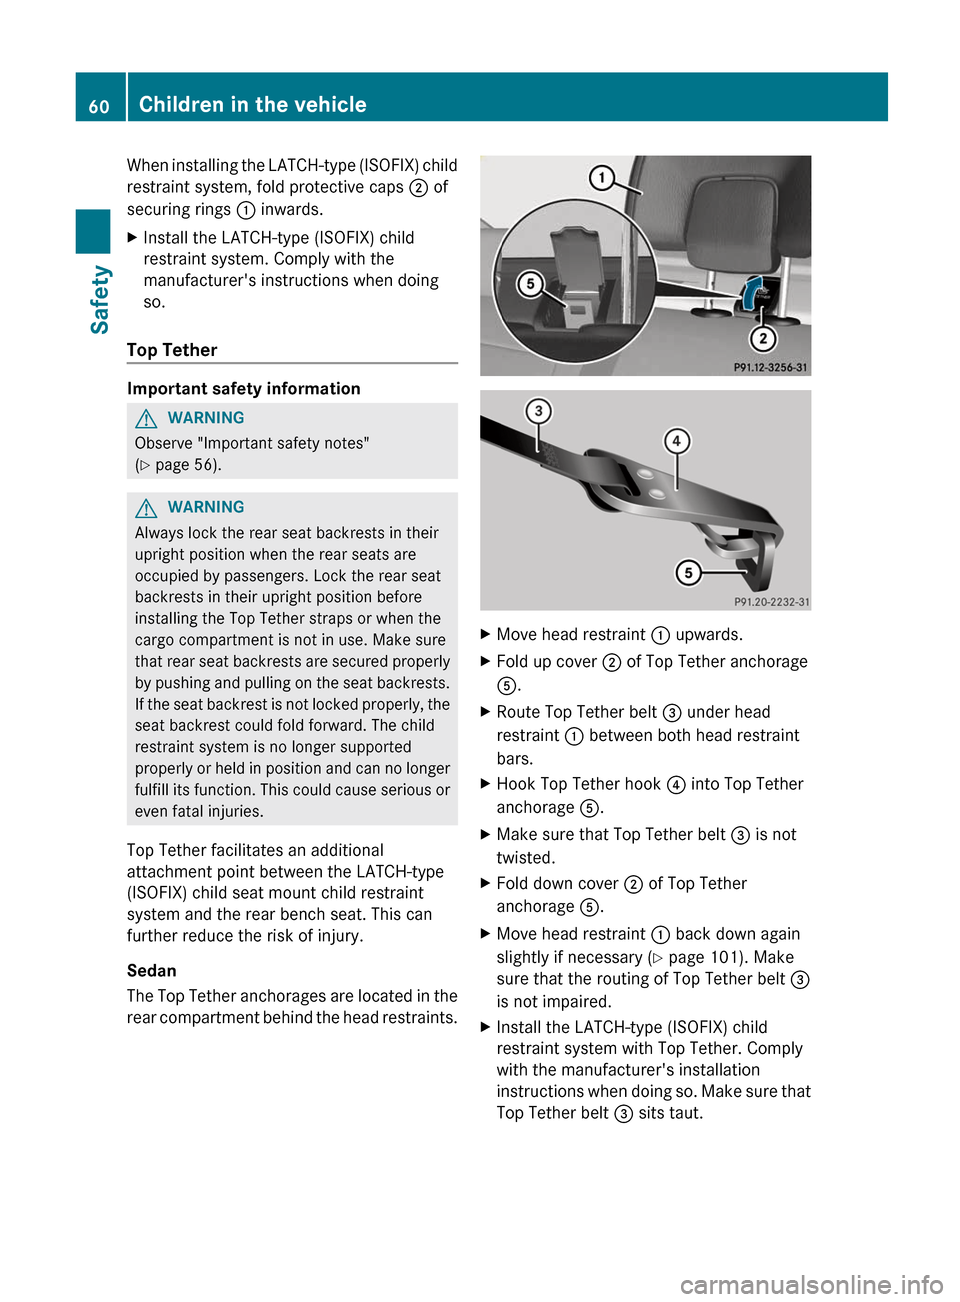 MERCEDES-BENZ E-Class SEDAN 2012 W212 Owners Manual When installing the LATCH-type (ISOFIX) child
restraint system, fold protective caps  2 of
securing rings  1 inwards.XInstall the LATCH-type (ISOFIX) child
restraint system. Comply with the
manufactur